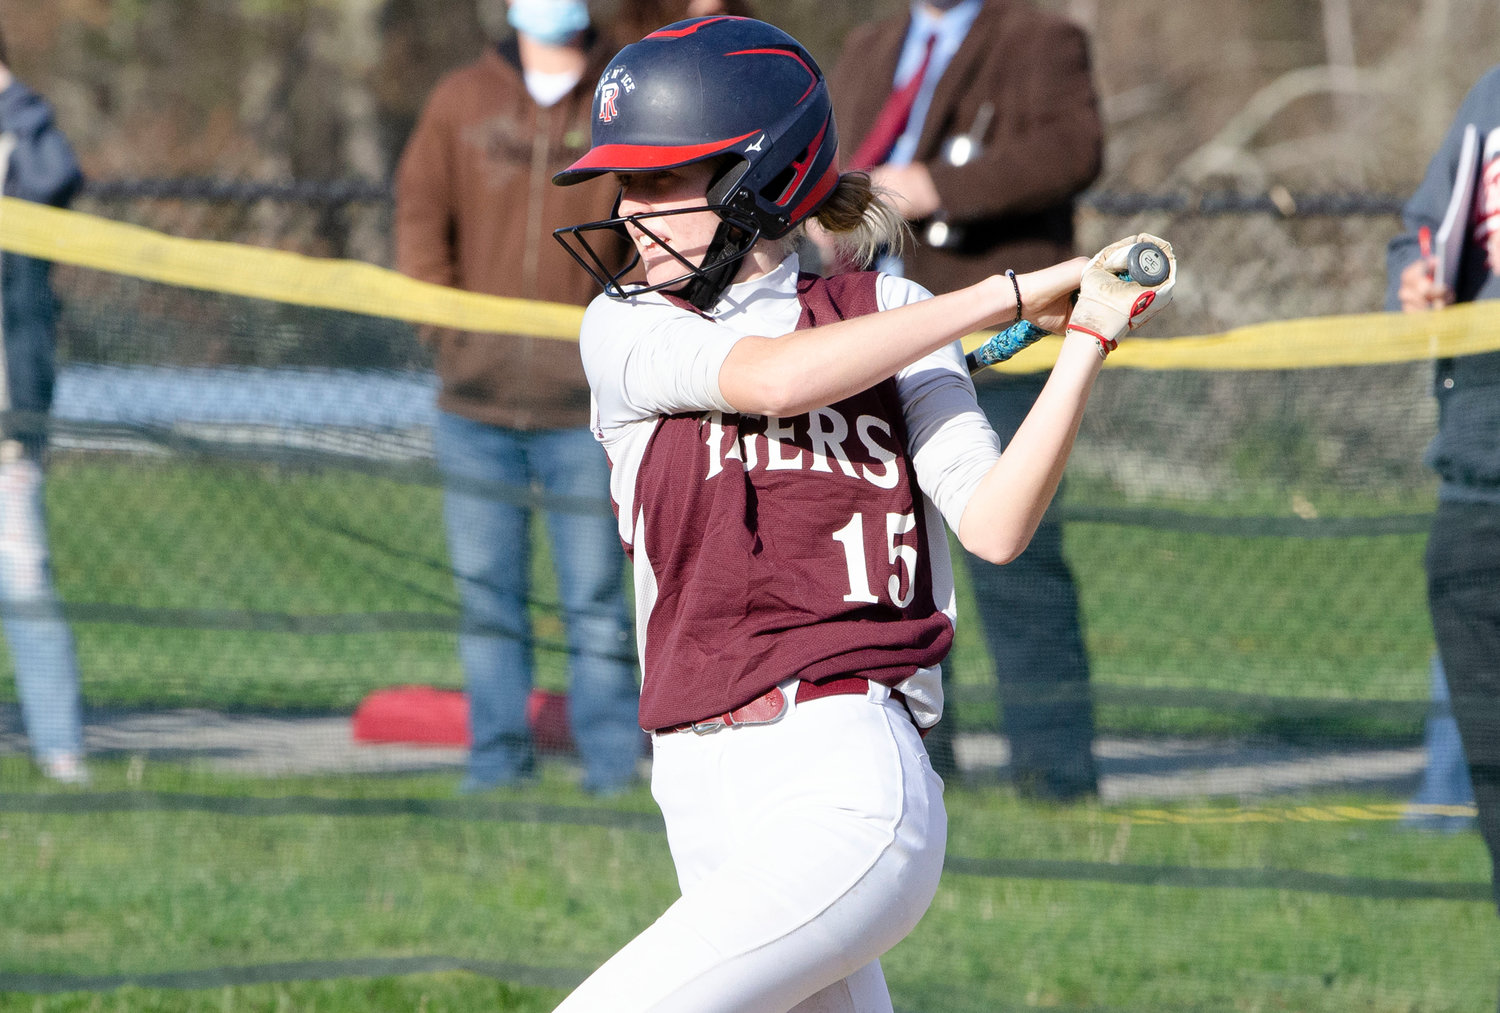 Mackenzie Kiley drove in three runs on two hits and scored two runs, to lead the Tiverton softball team over Davies, 11-1, during a home game on Tuesday afternoon.